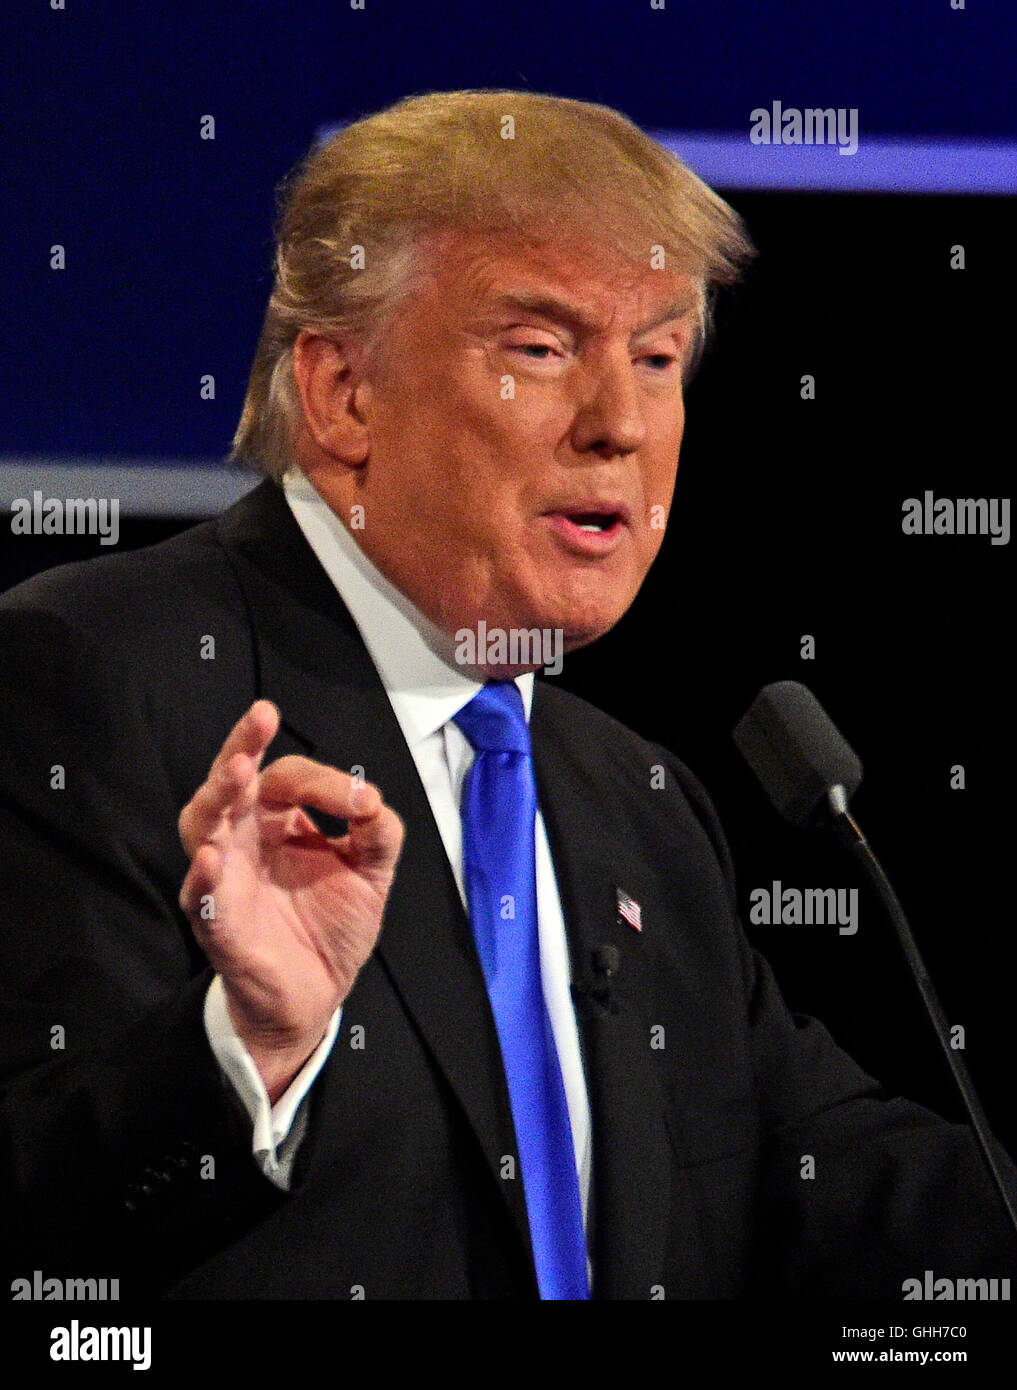 Hempstead, Us. 26th Sep, 2016. Businessman Donald J. Trump, the Republican Party nominee for President of the United States, makes a point as he appears with former US Secretary of State Hillary Clinton, the Democratic Party nominee for President of the US in the first of three presidential general election debates at Hofstra University in Hempstead, New York on Monday, September 26, 2016. Credit: Ron Sachs/CNP (RESTRICTION: NO New York or New Jersey Newspapers or newspapers within a 75 mile radius of New York City) - NO WIRE SERVICE - © dpa/Alamy Live News Stock Photo